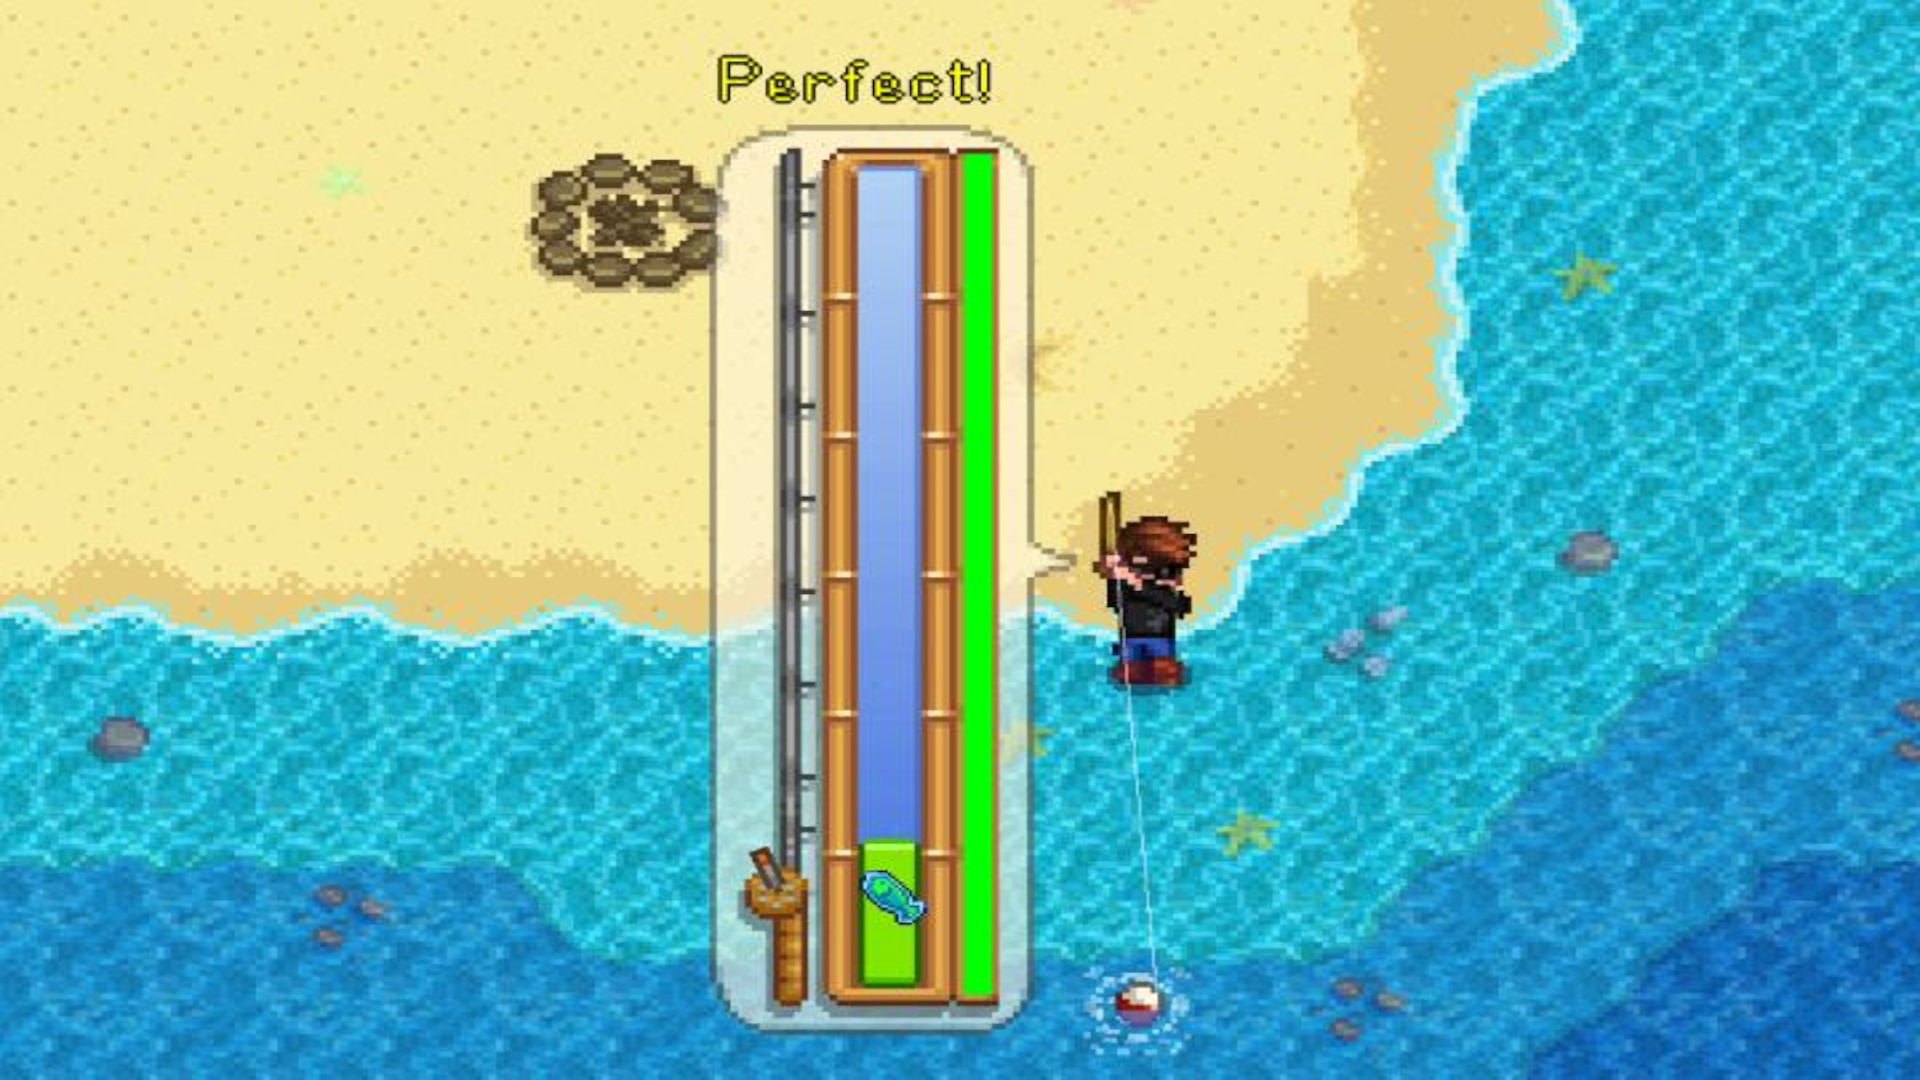 Stardew Valley fish guide - every fish, the fish pond, fish bundles, and professions